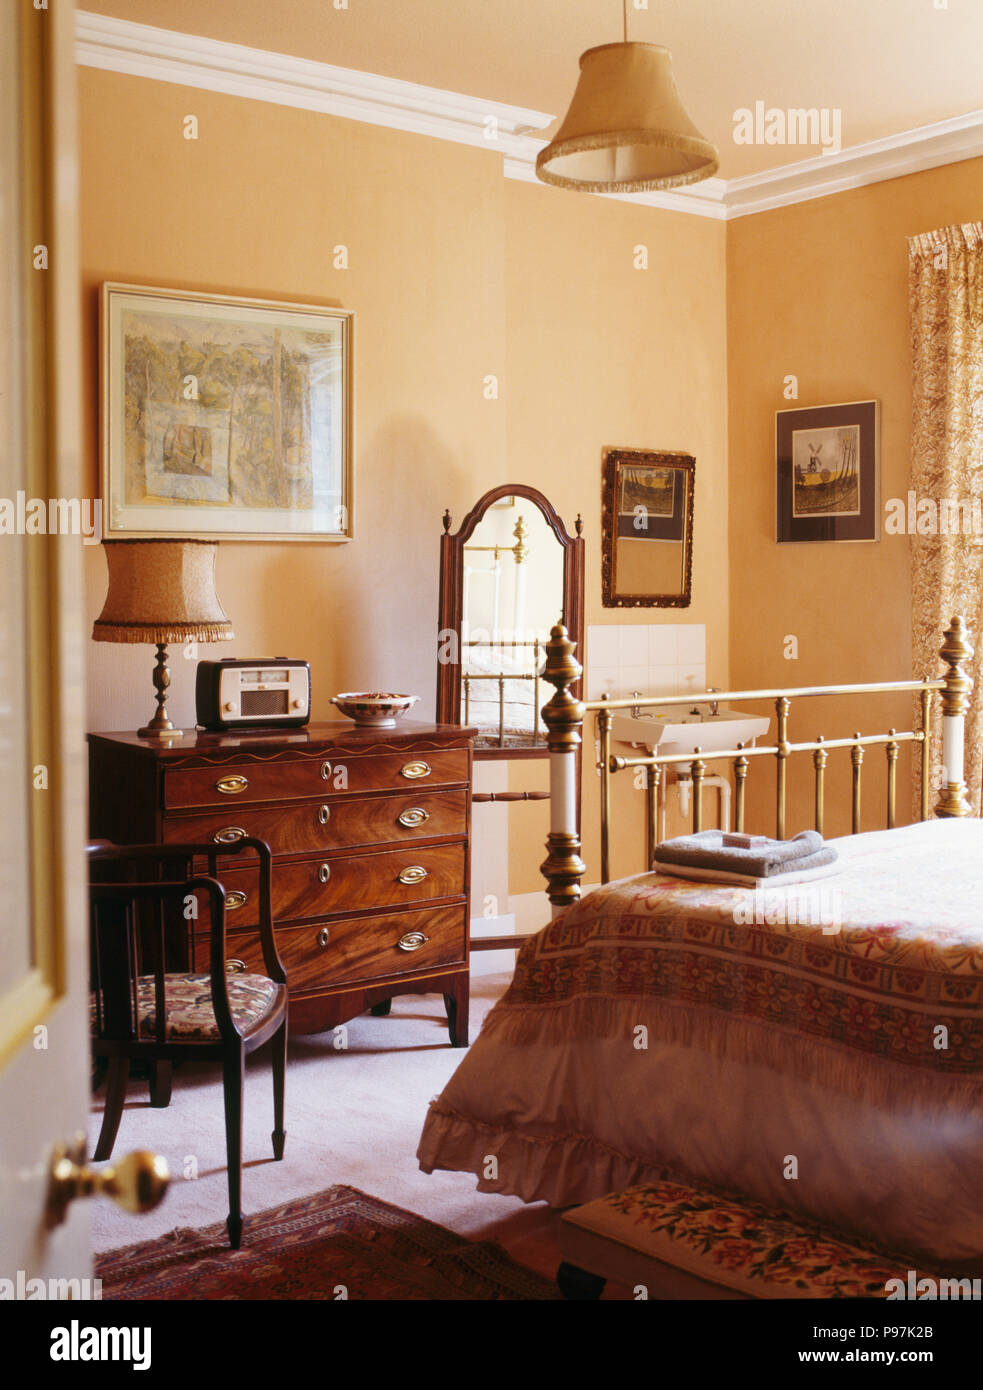 Antique Furniture In Peach Country Bedroom Stock Photo